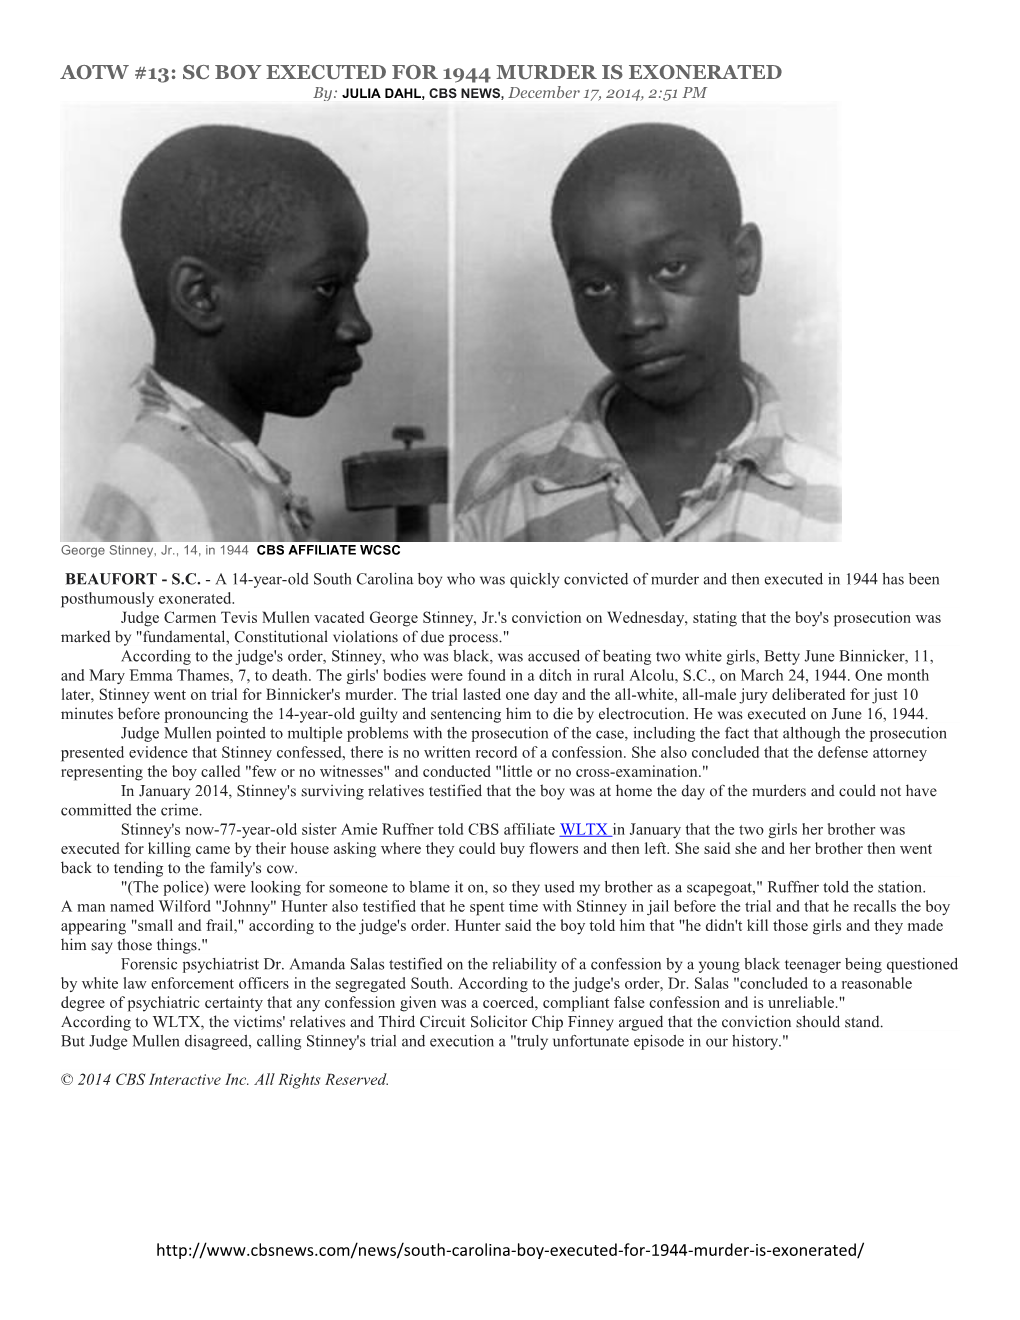 Aotw #13: Sc Boy Executed for 1944 Murder Is Exonerated